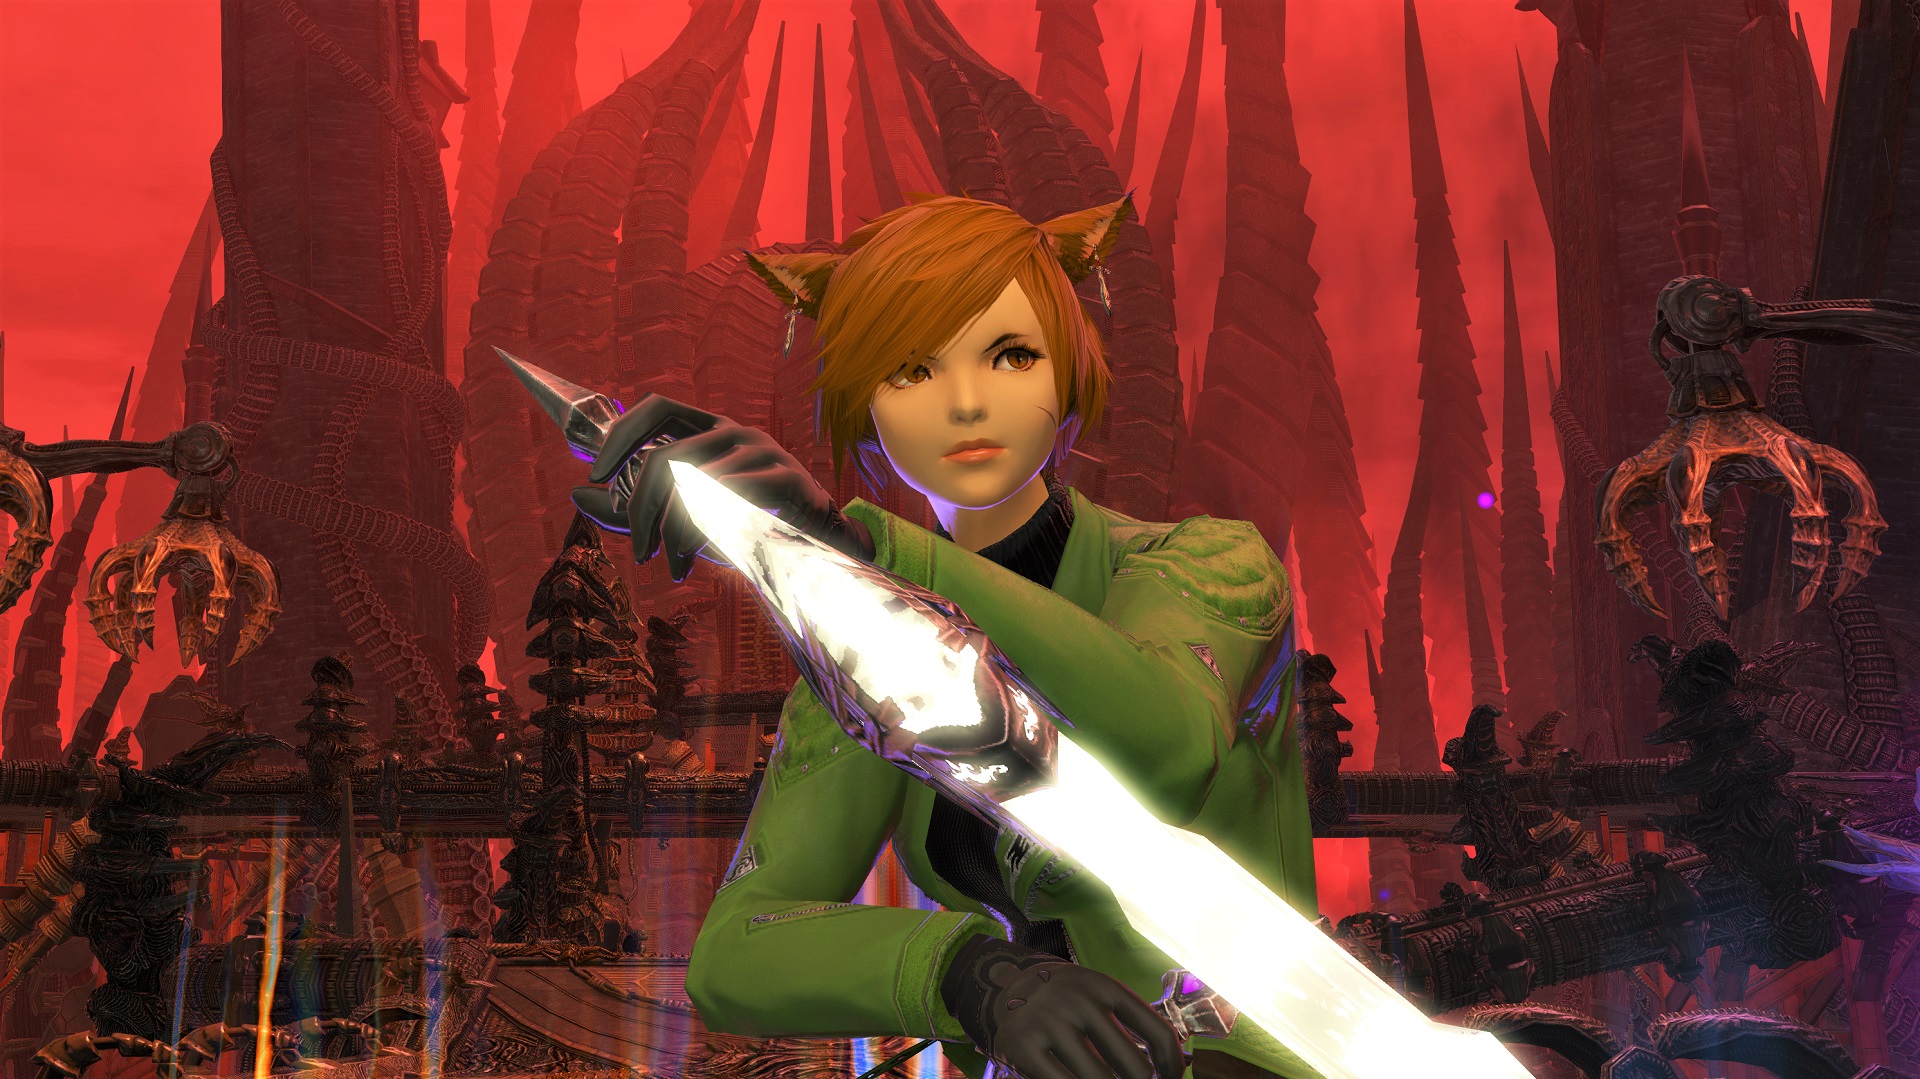 FFXIV 6.1 Ninja's Trick Attack gets Nerfed, Mugged Even -- But it's not all bad!